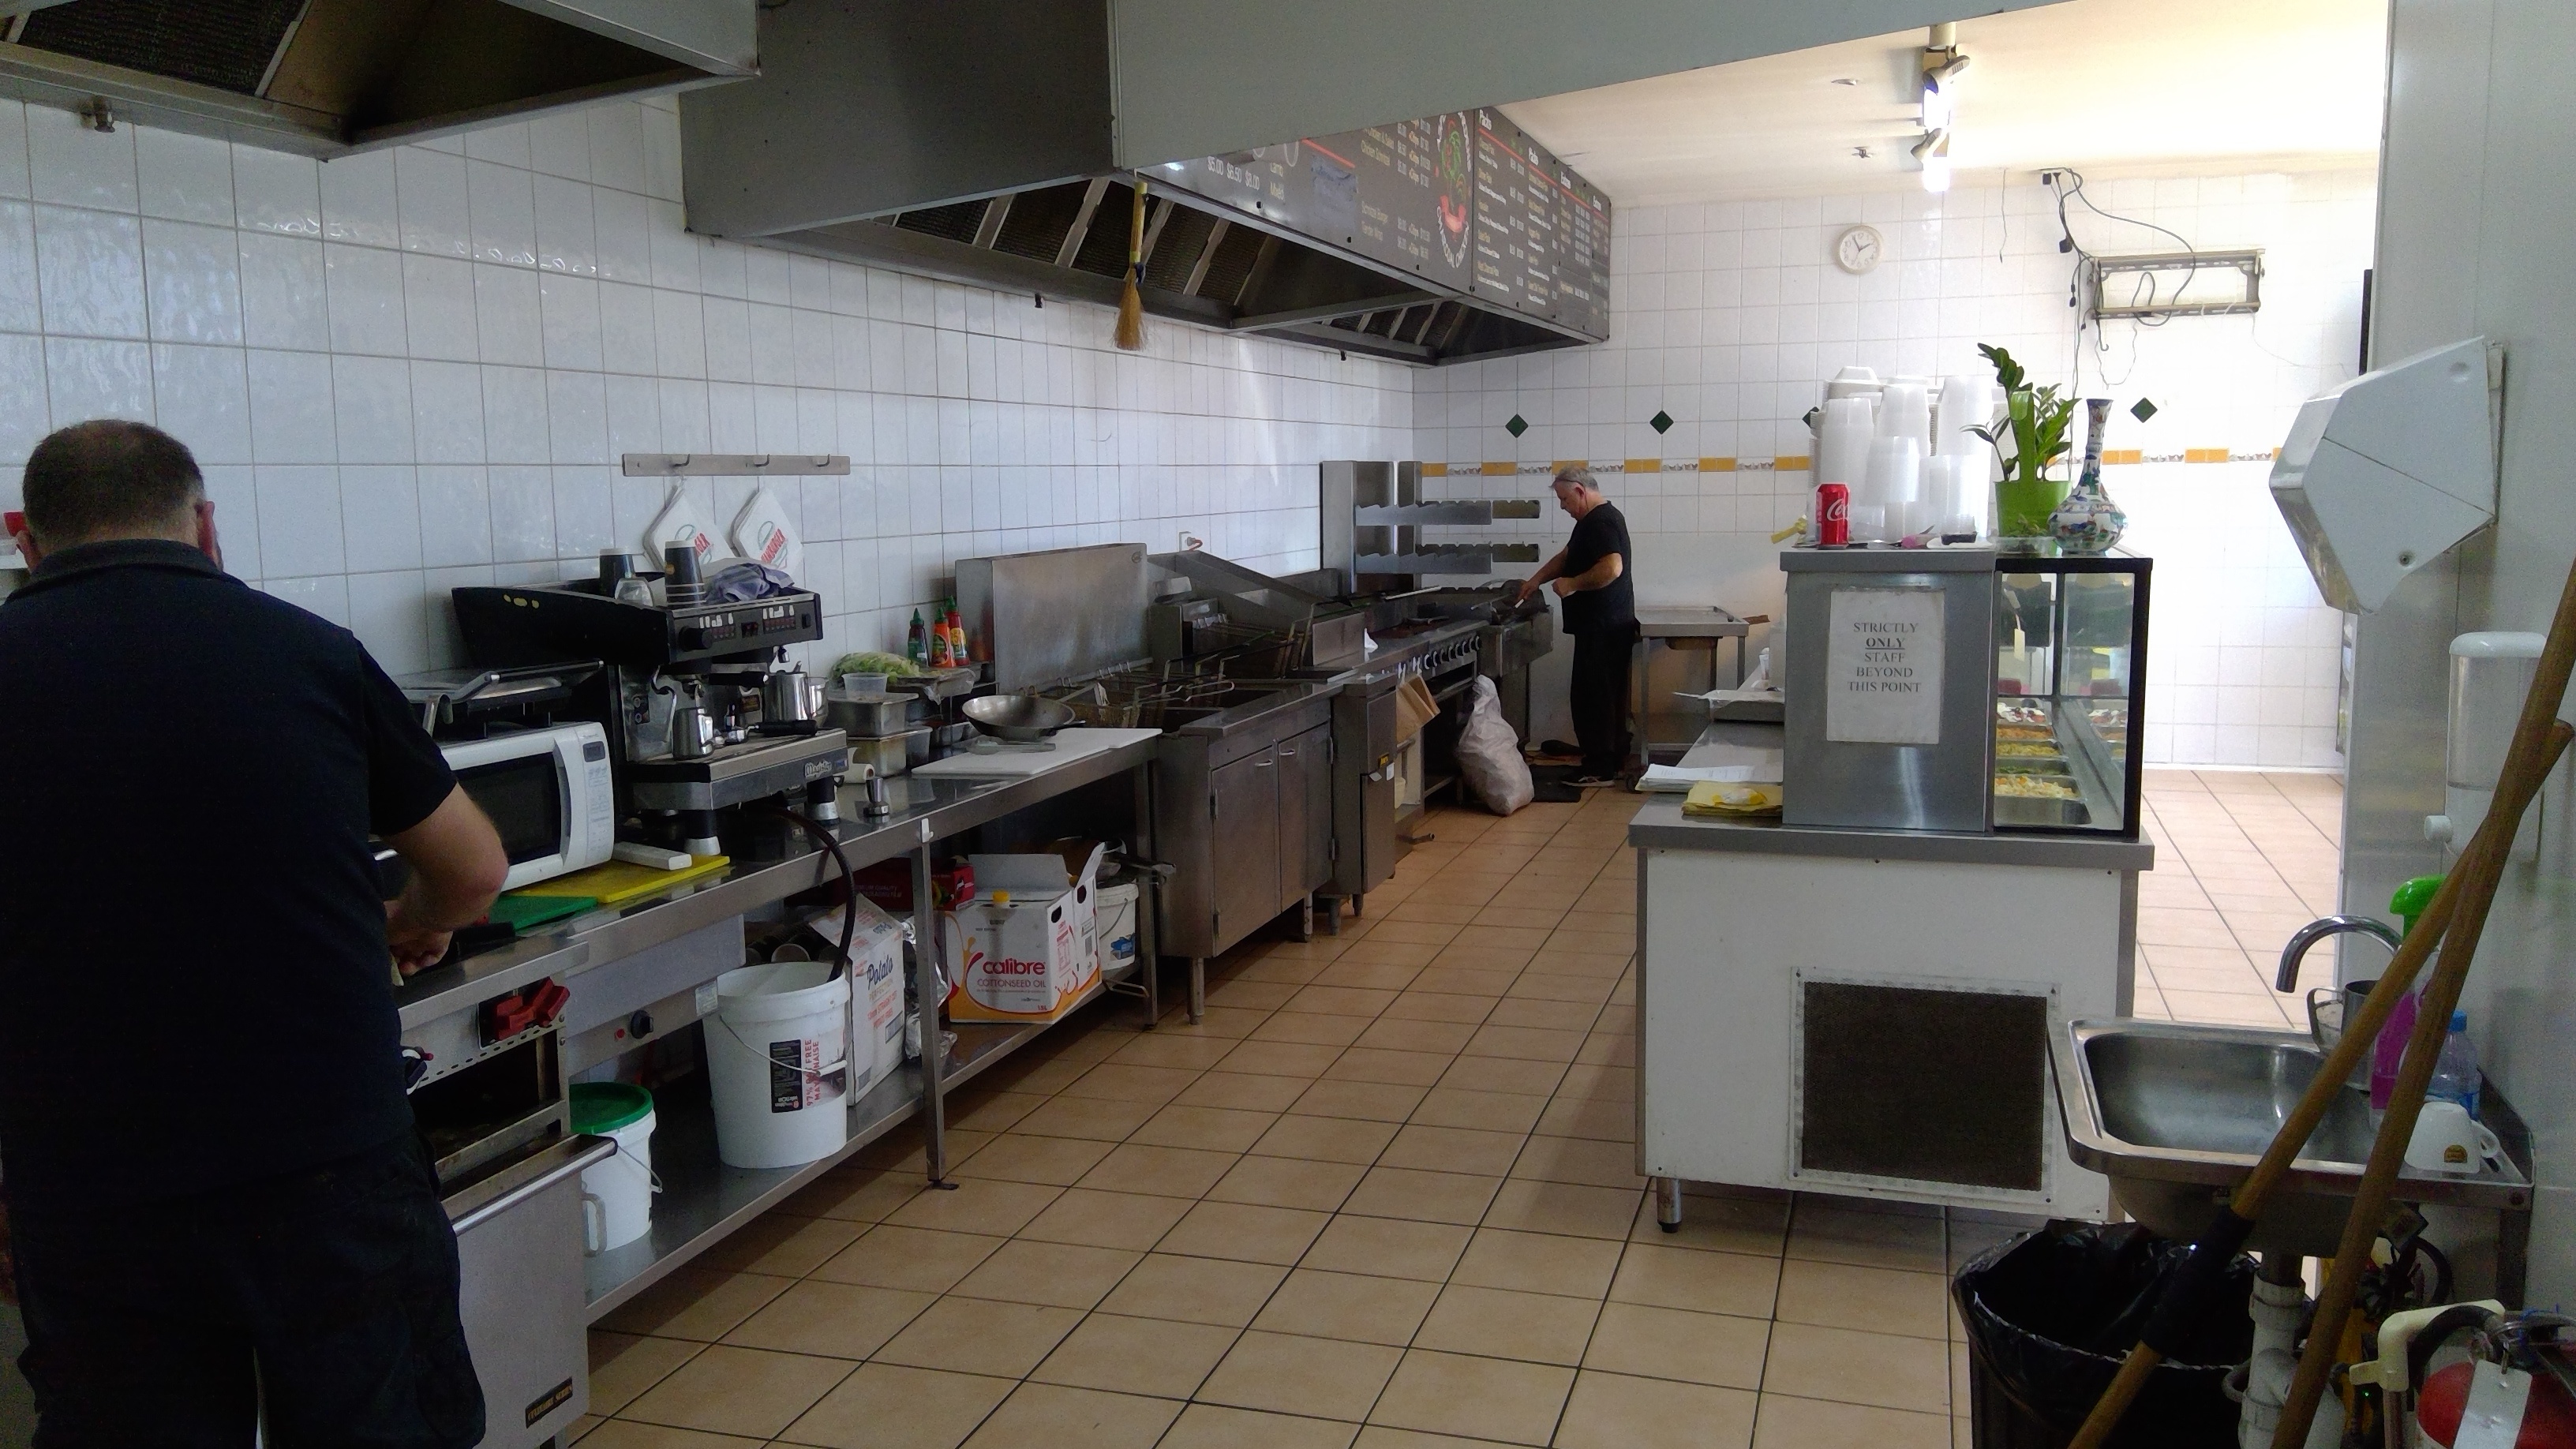 CHARCOAL CHICKEN SHOP FOR SALE | $45k WIWO | FULL COMMERCIAL KITC